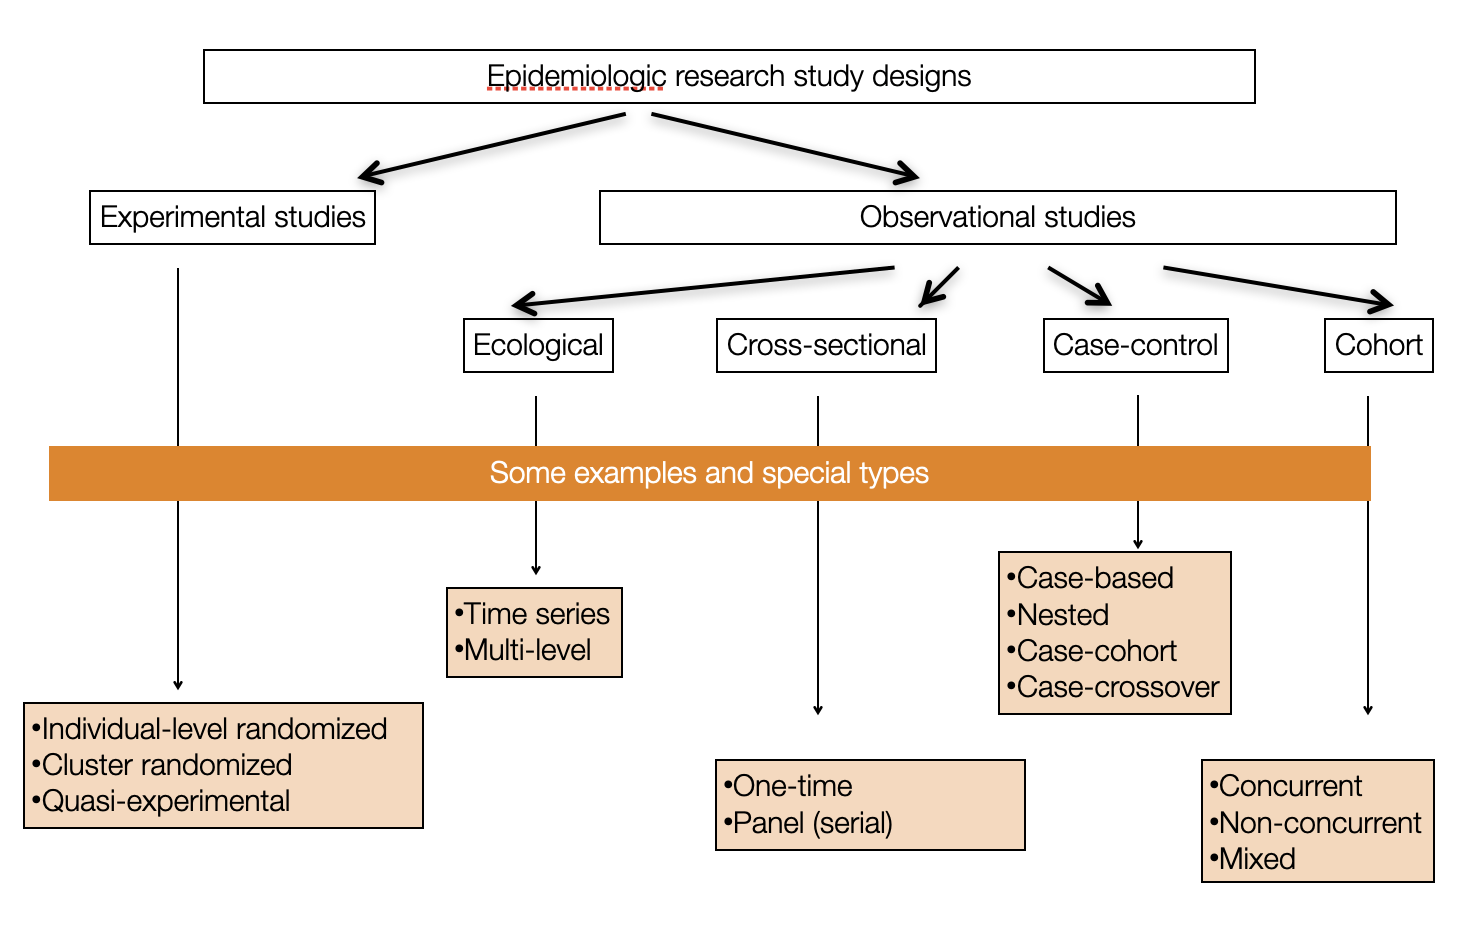 Overview of different research designs